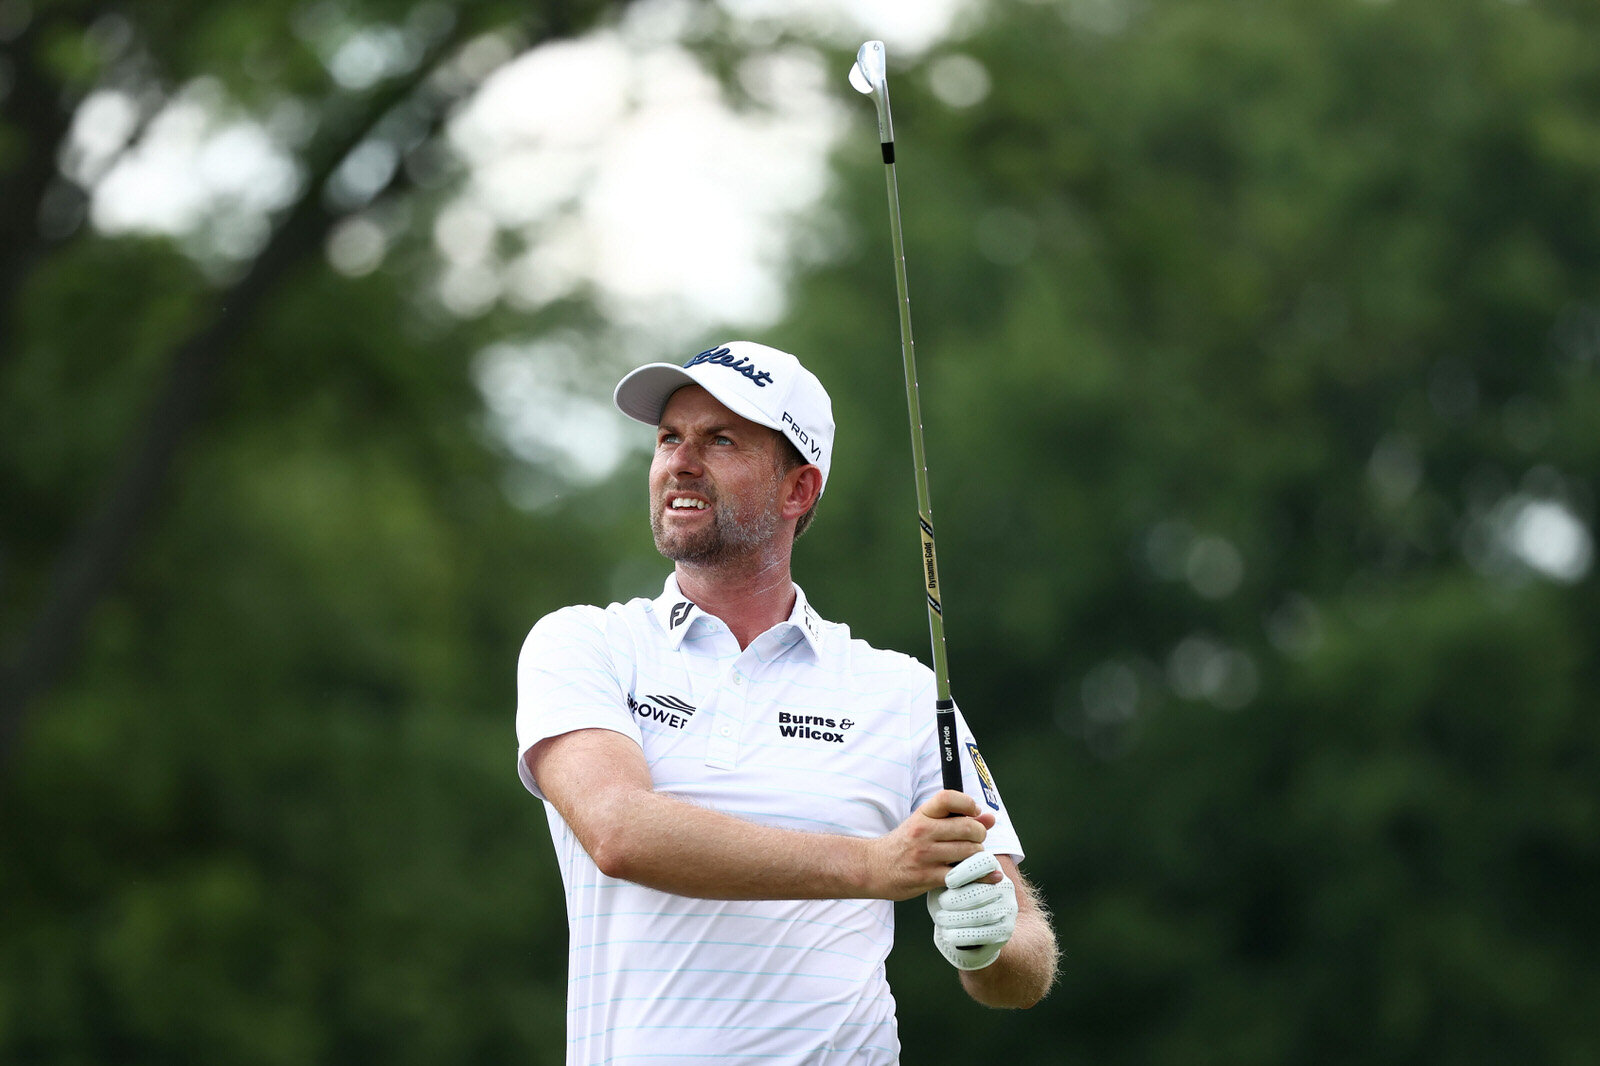  DETROIT, MICHIGAN - JULY 03: Webb Simpson of the United States plays his shot from the 15th tee during the second round of the Rocket Mortgage Classic on July 03, 2020 at the Detroit Golf Club in Detroit, Michigan. (Photo by Leon Halip/Getty Images)